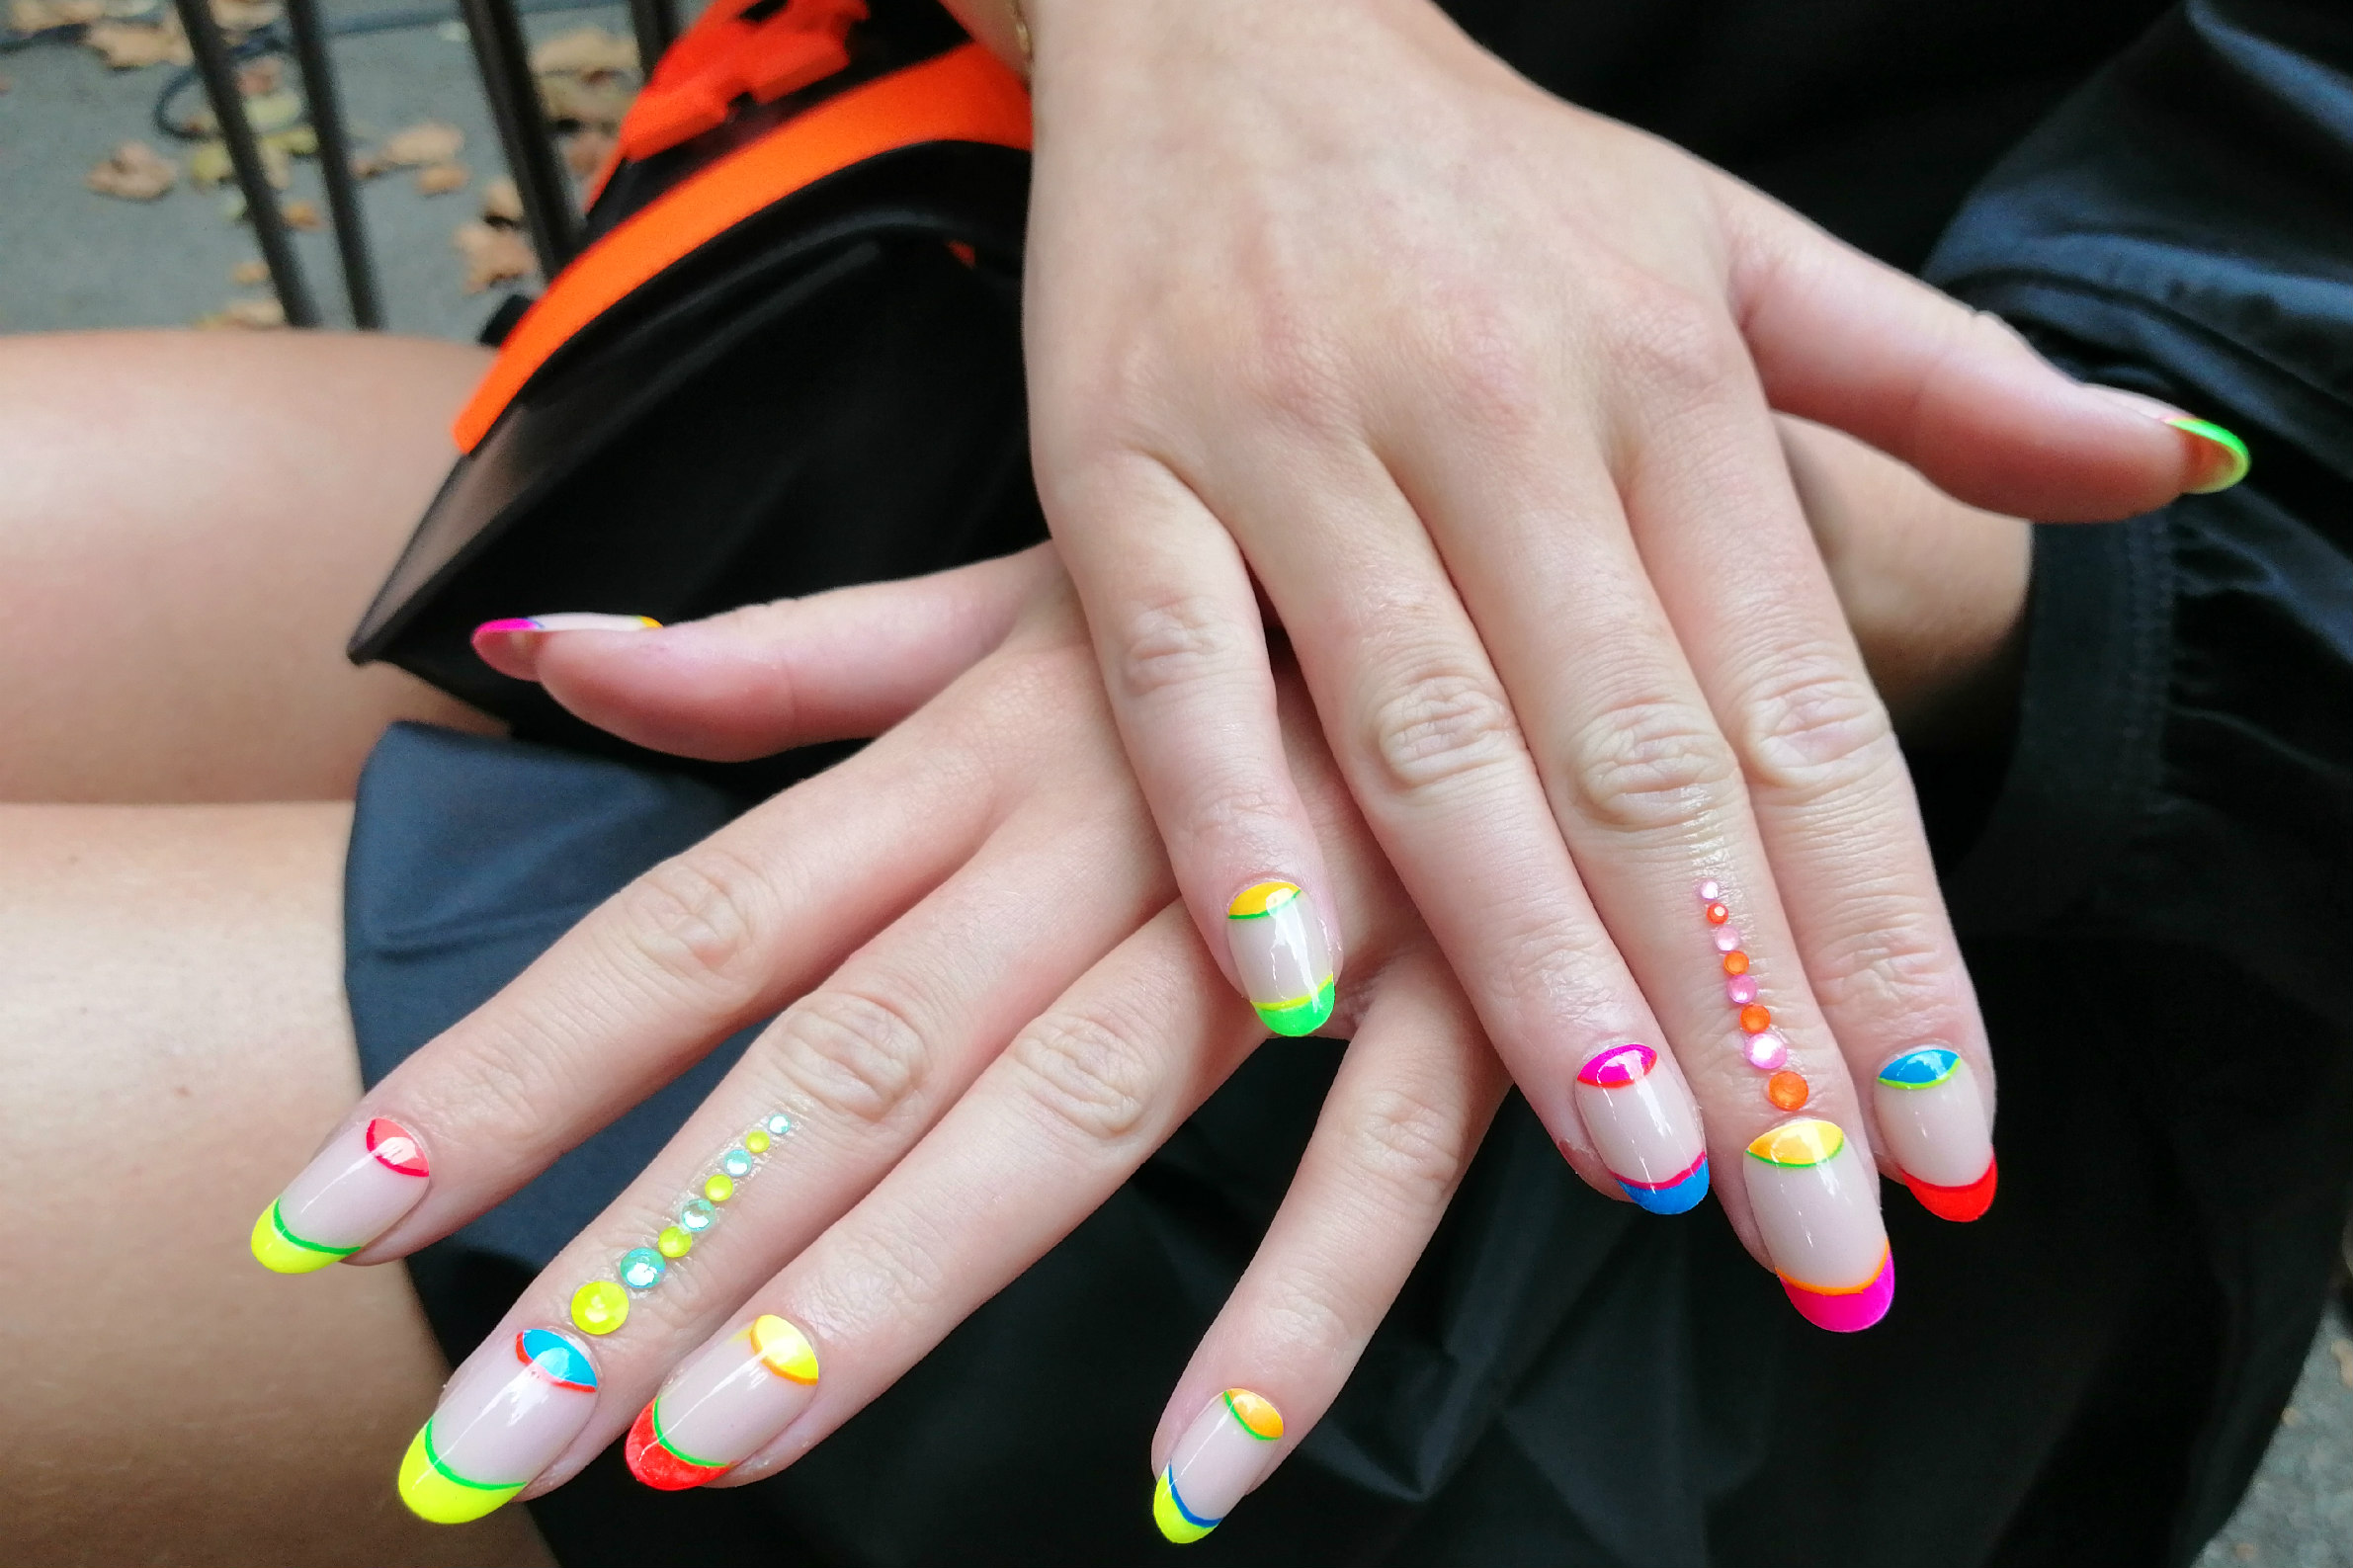 Fashions Finest LFW nail art trends. Nails by Julie Bryan. Ph. Valentina Chirico